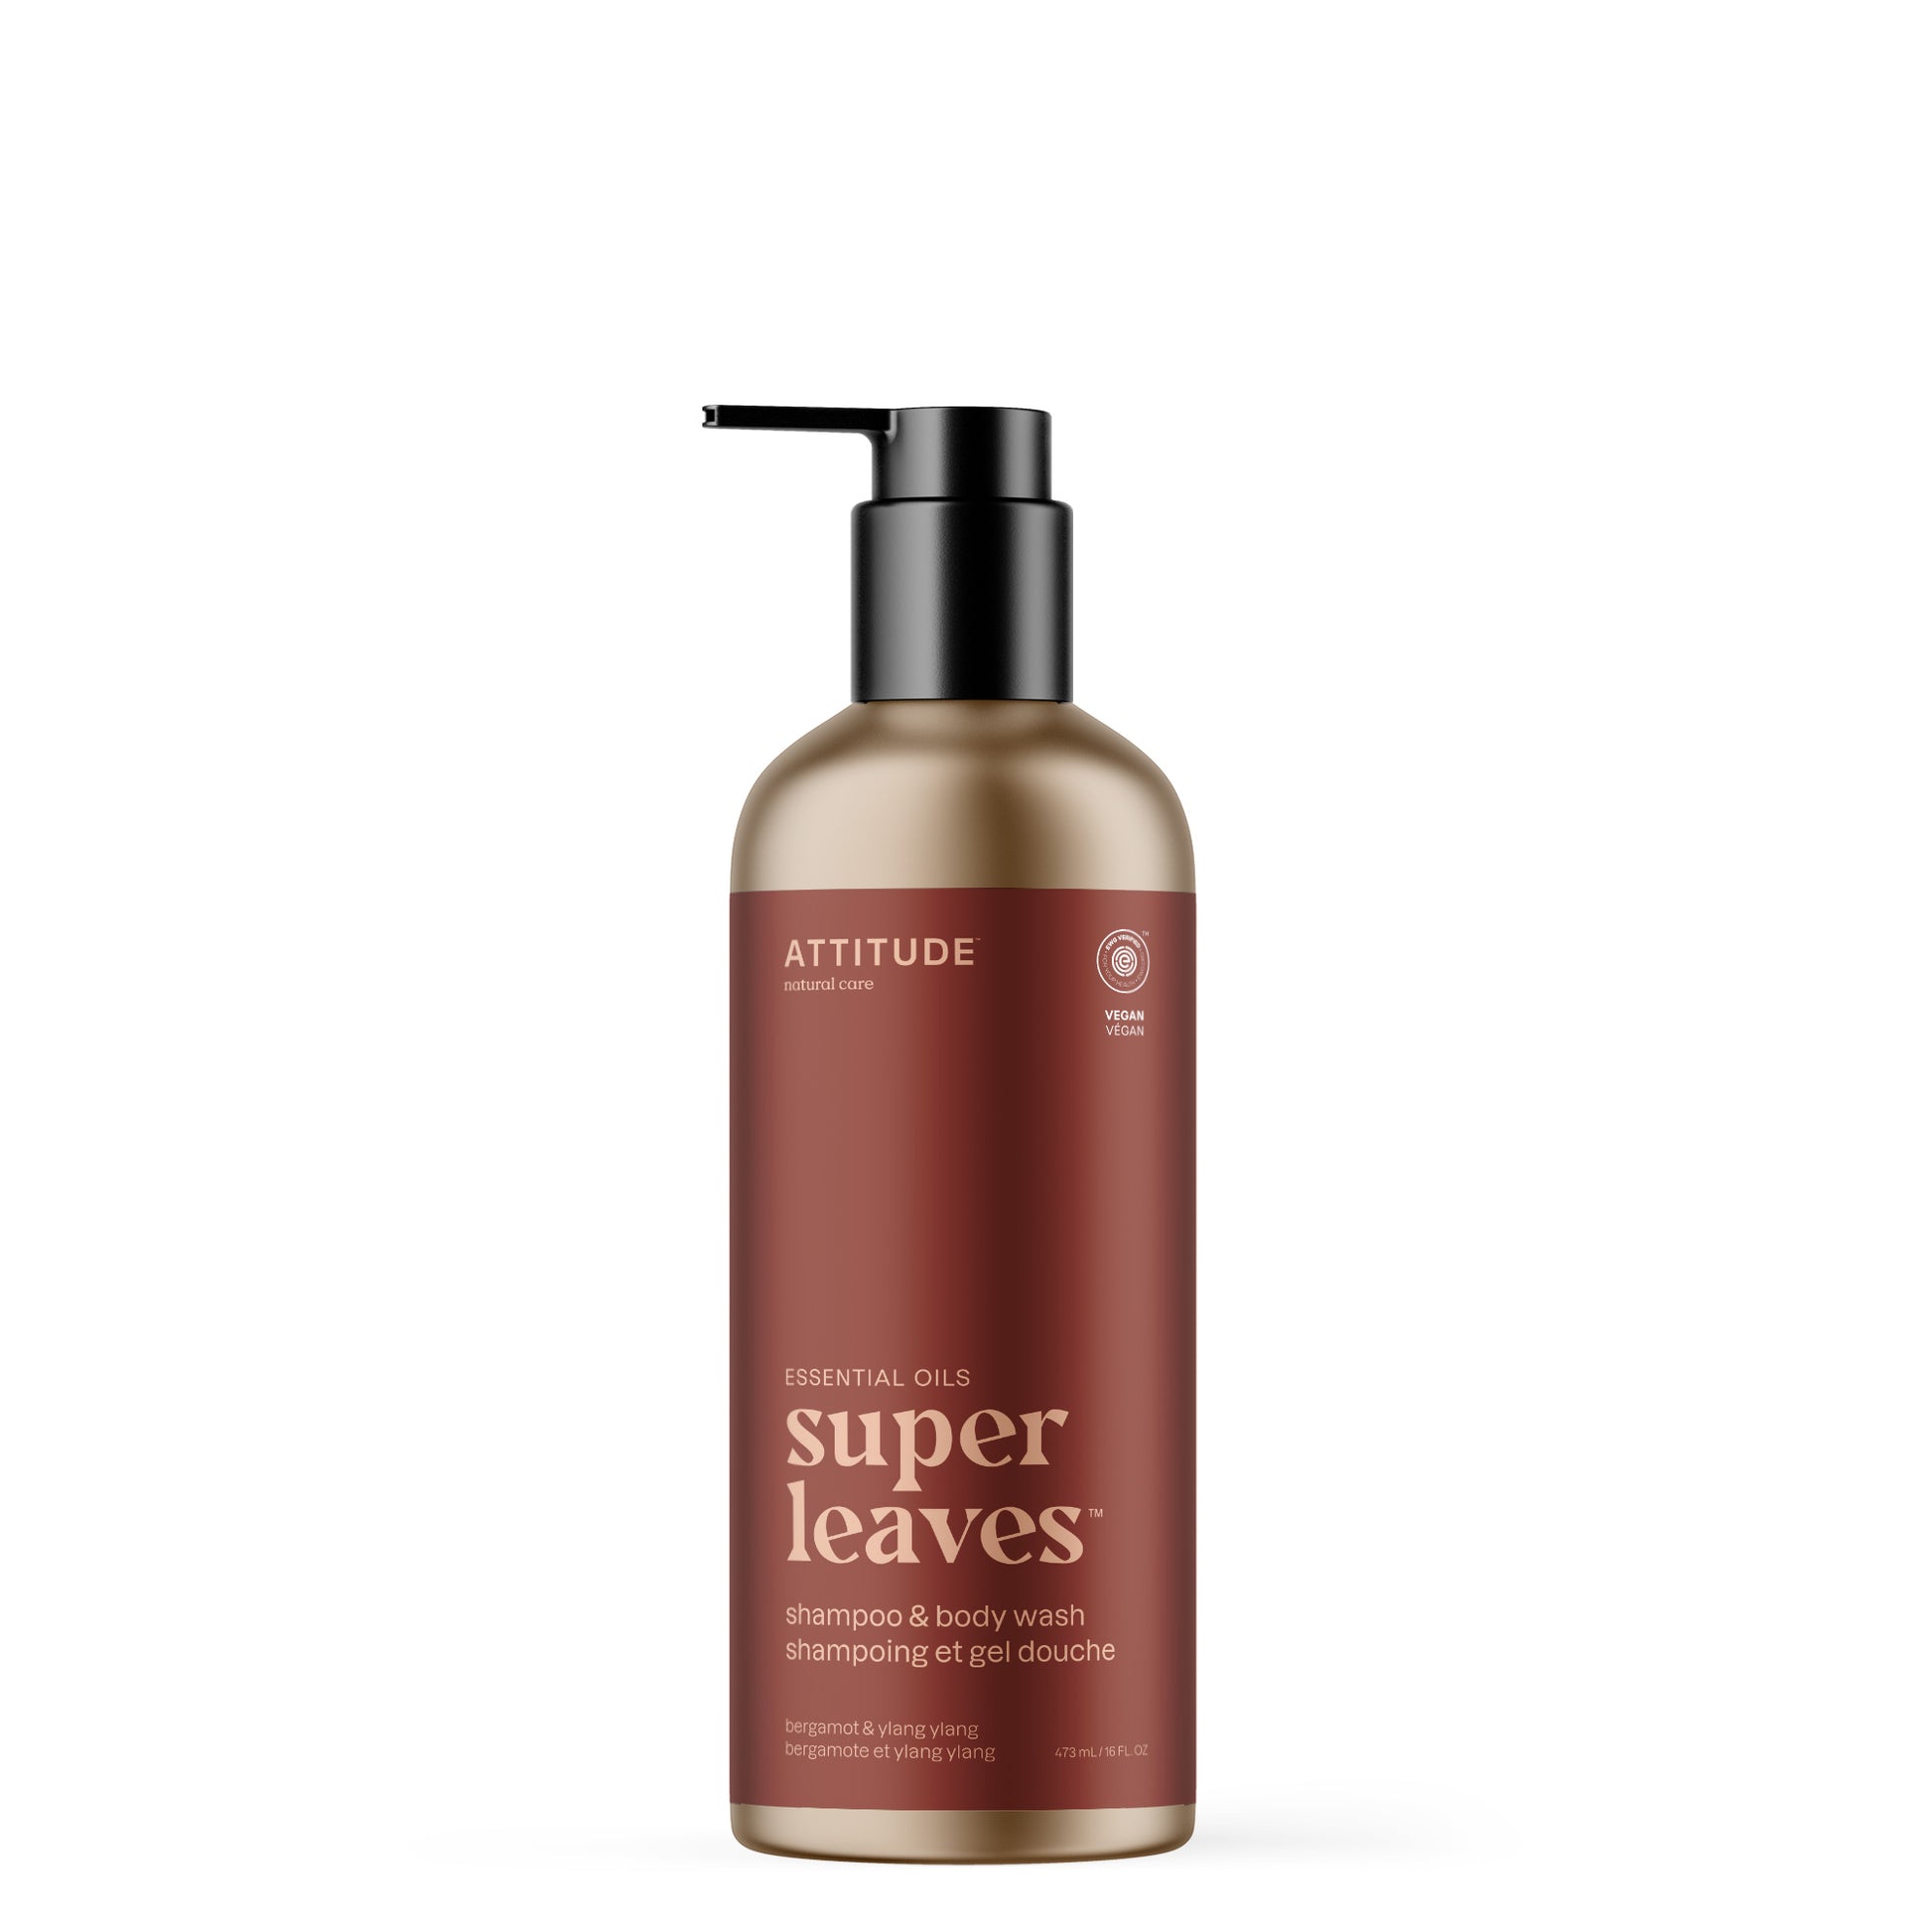 ATTITUDE Super Leaves Essential huile essentielle shampoing gel douche Bergamote et ylang-ylang 19002_fr?_main? 473ml